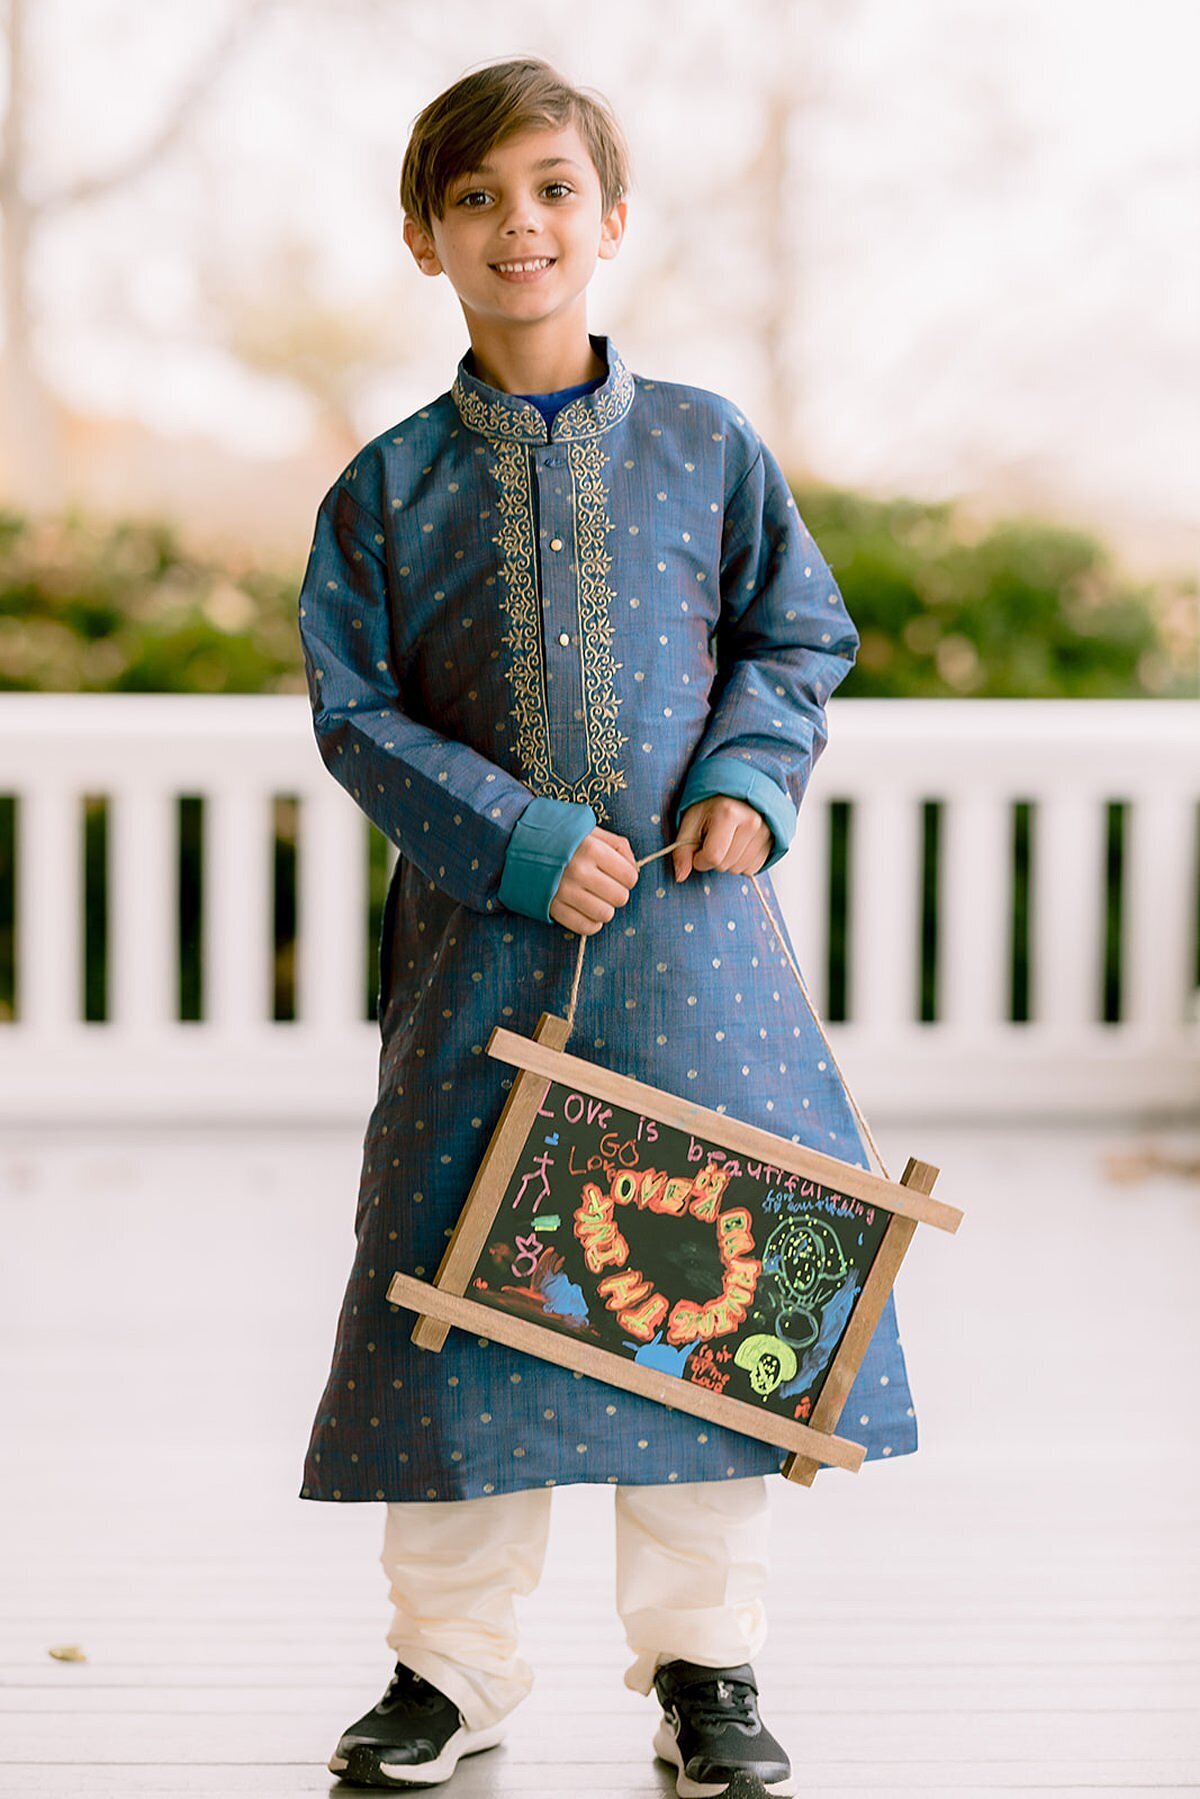 Indian ring bearer holding a chalkboard sign at Ravenswood Mansion wearing a blue and white sherwani.